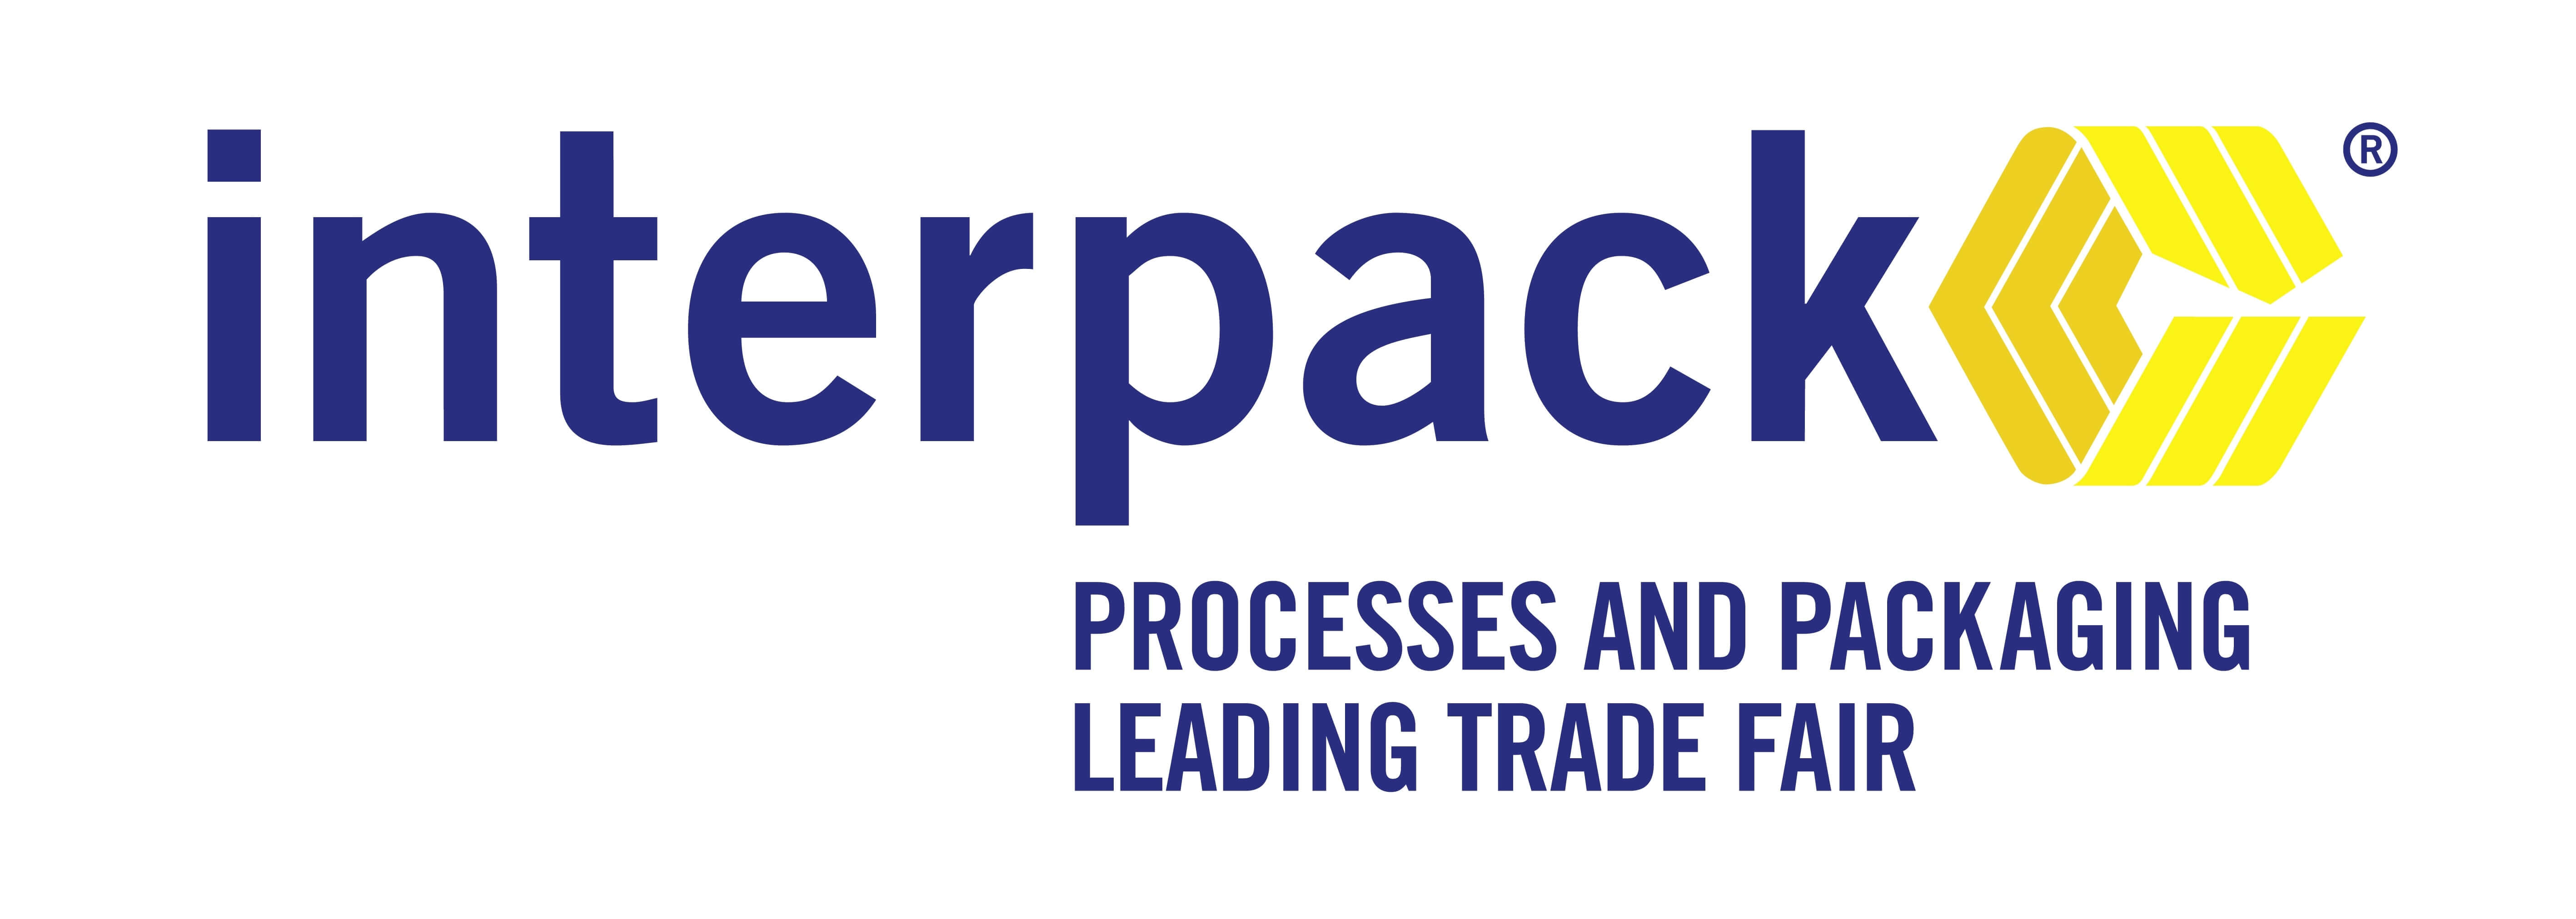 Interpack 2017 Angle Exhibits